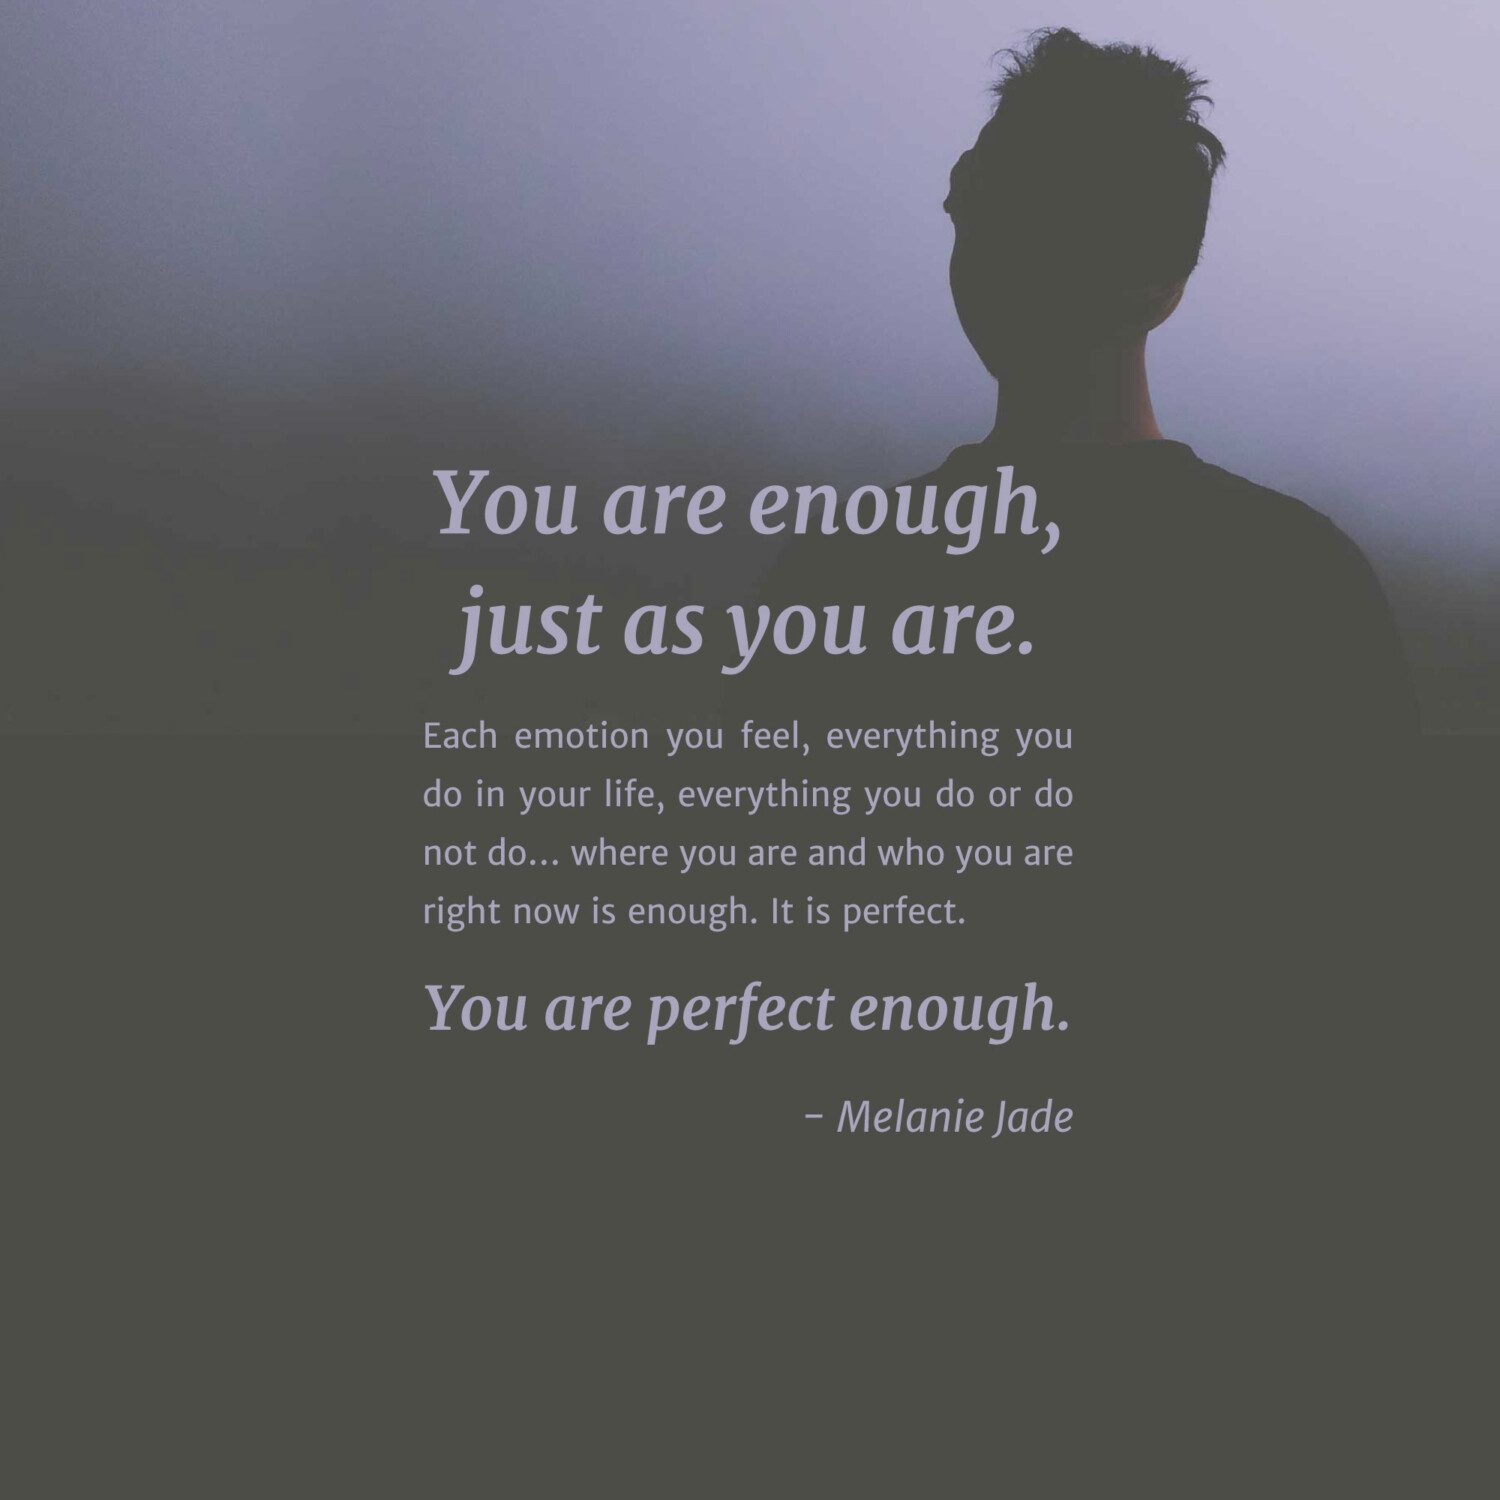 You are enough, just as you are.